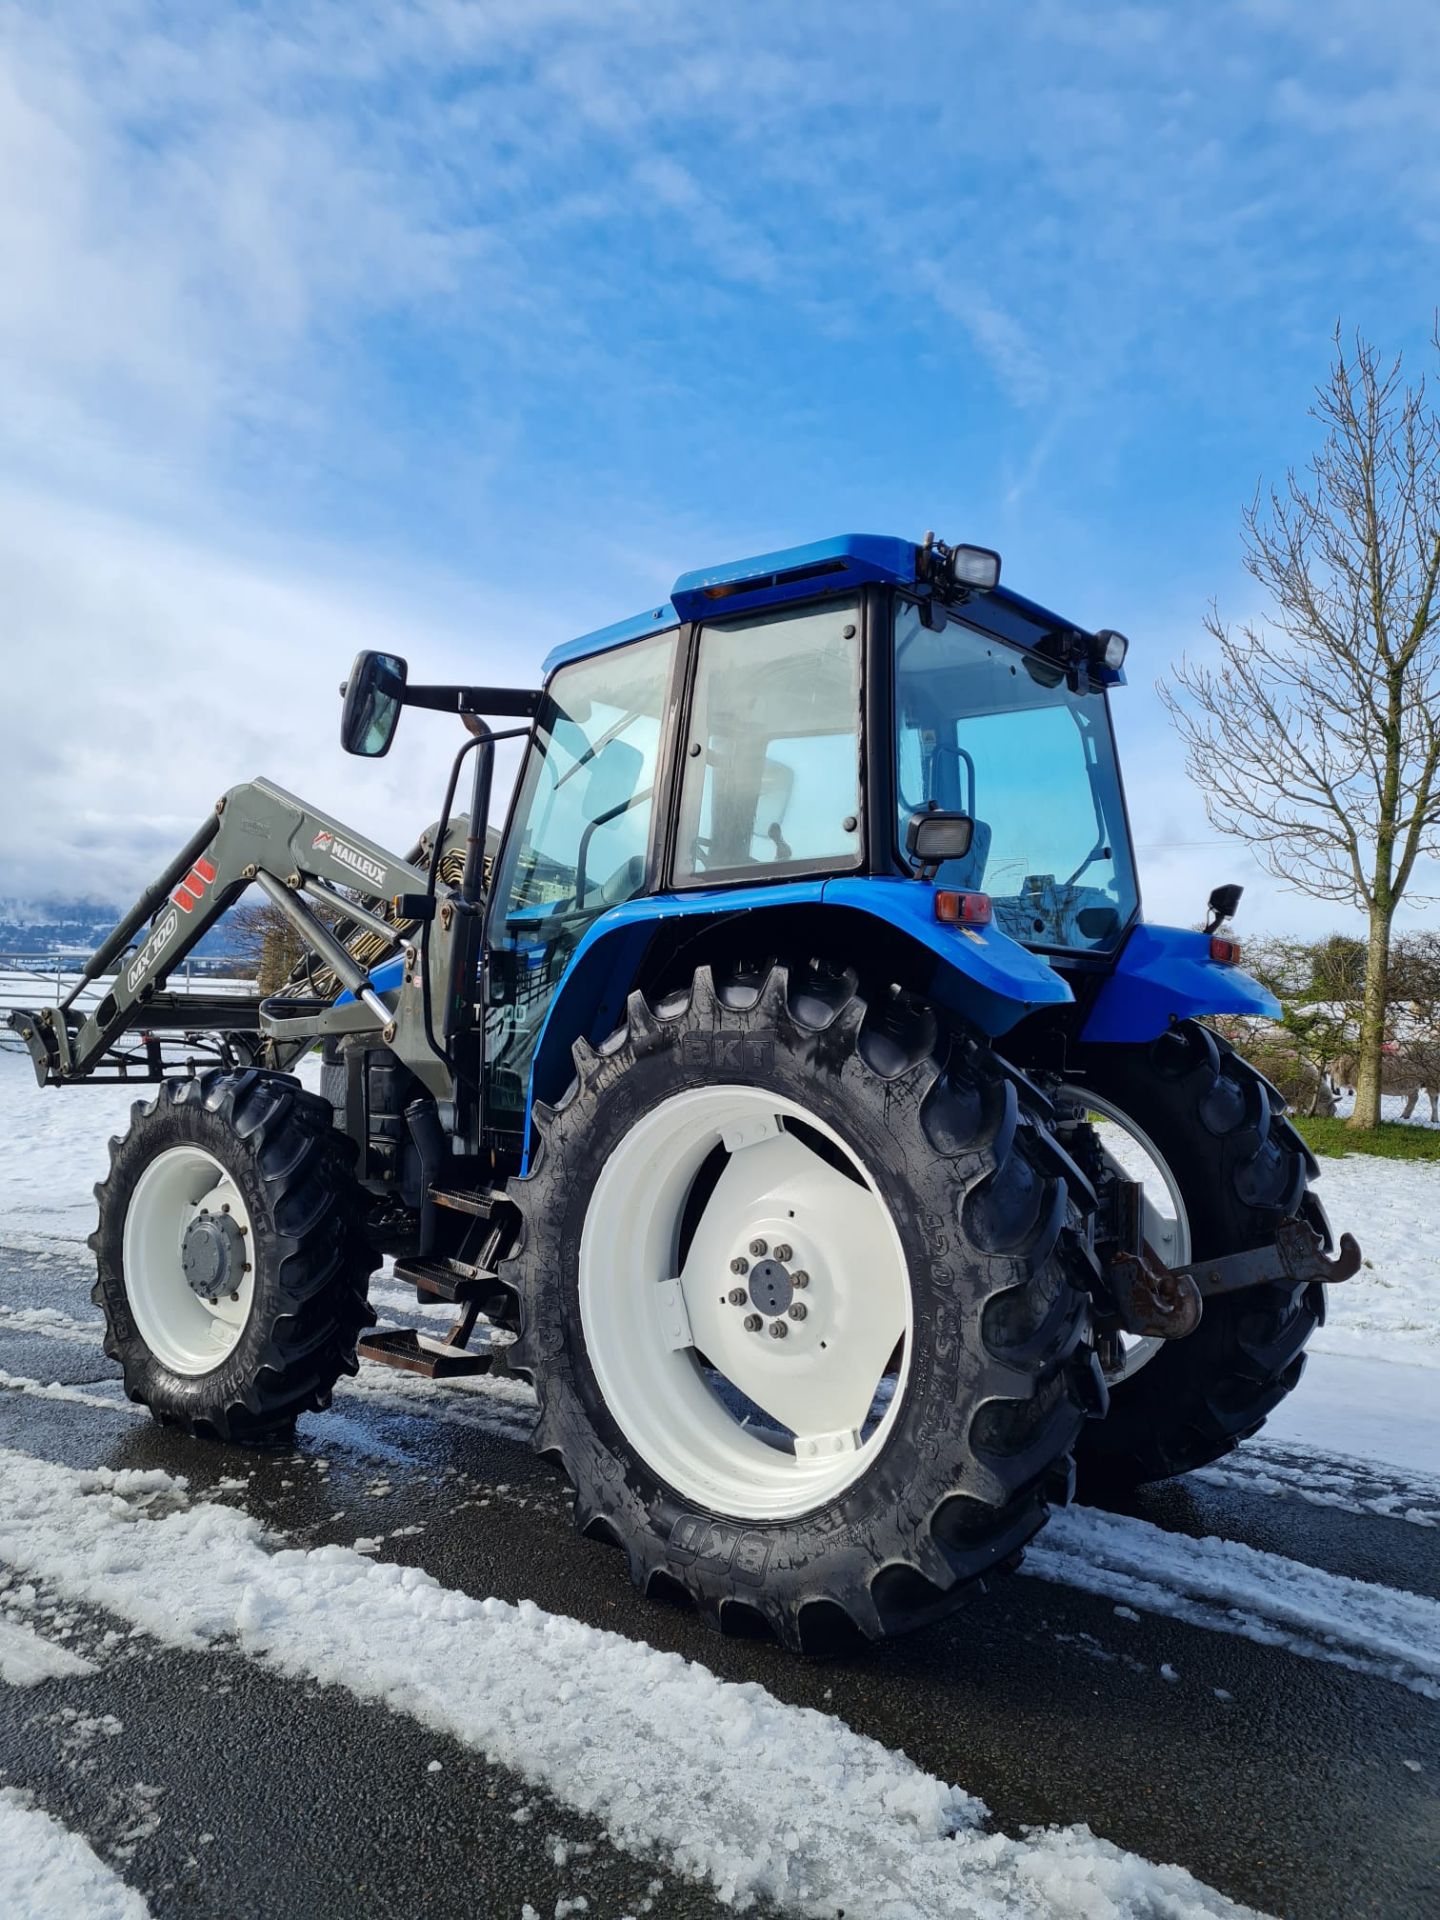 NEW HOLLAND TS 100, YEAR 2000, 11,000 HOURS, MAILLEUX FRONT LOADER, 90% TYRES ALL ROUND *PLUS VAT* - Image 2 of 5